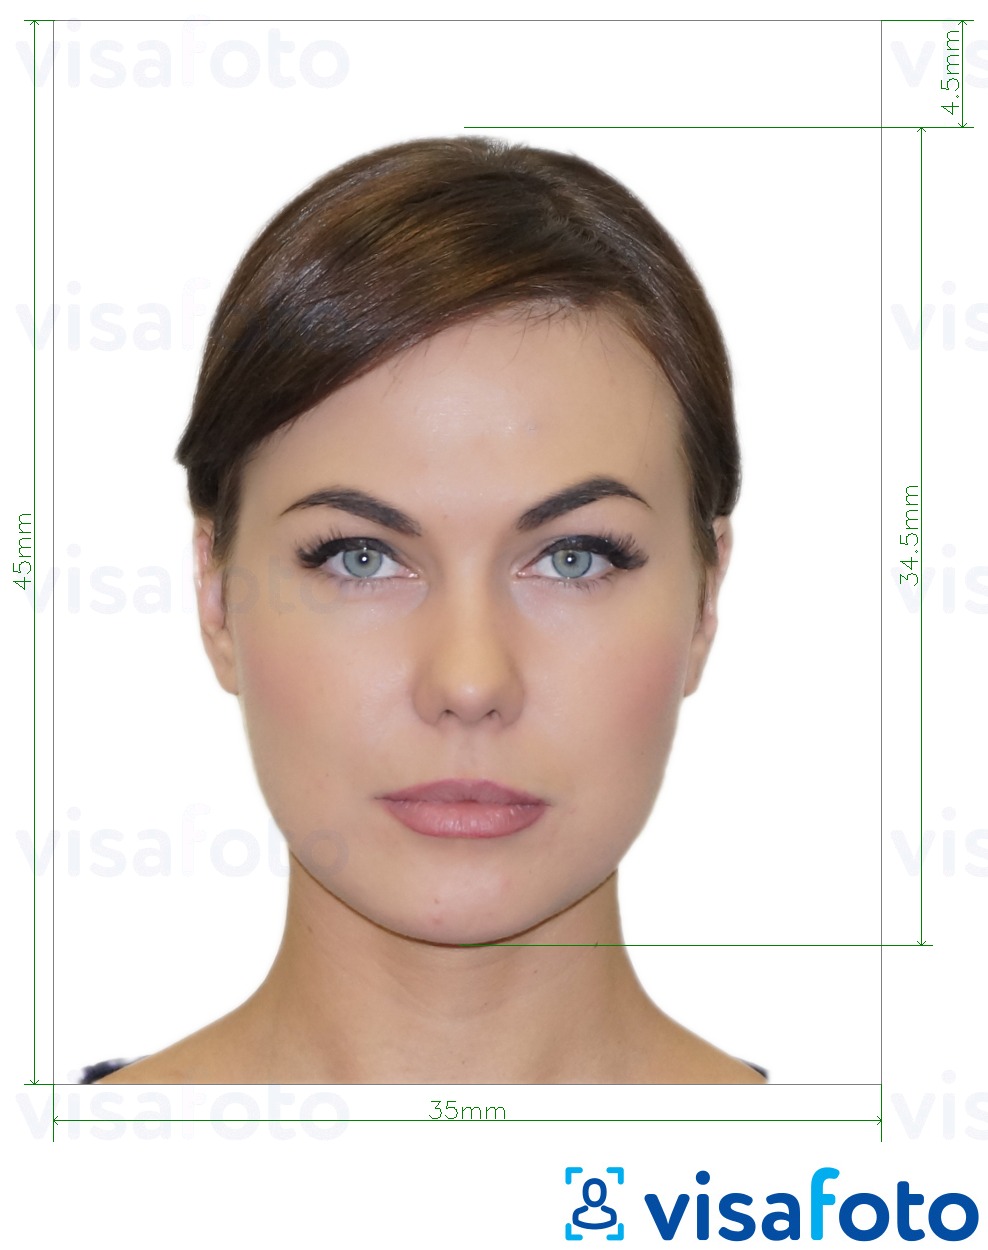 Example of photo for Mexico passport 35x45 mm with exact size specification